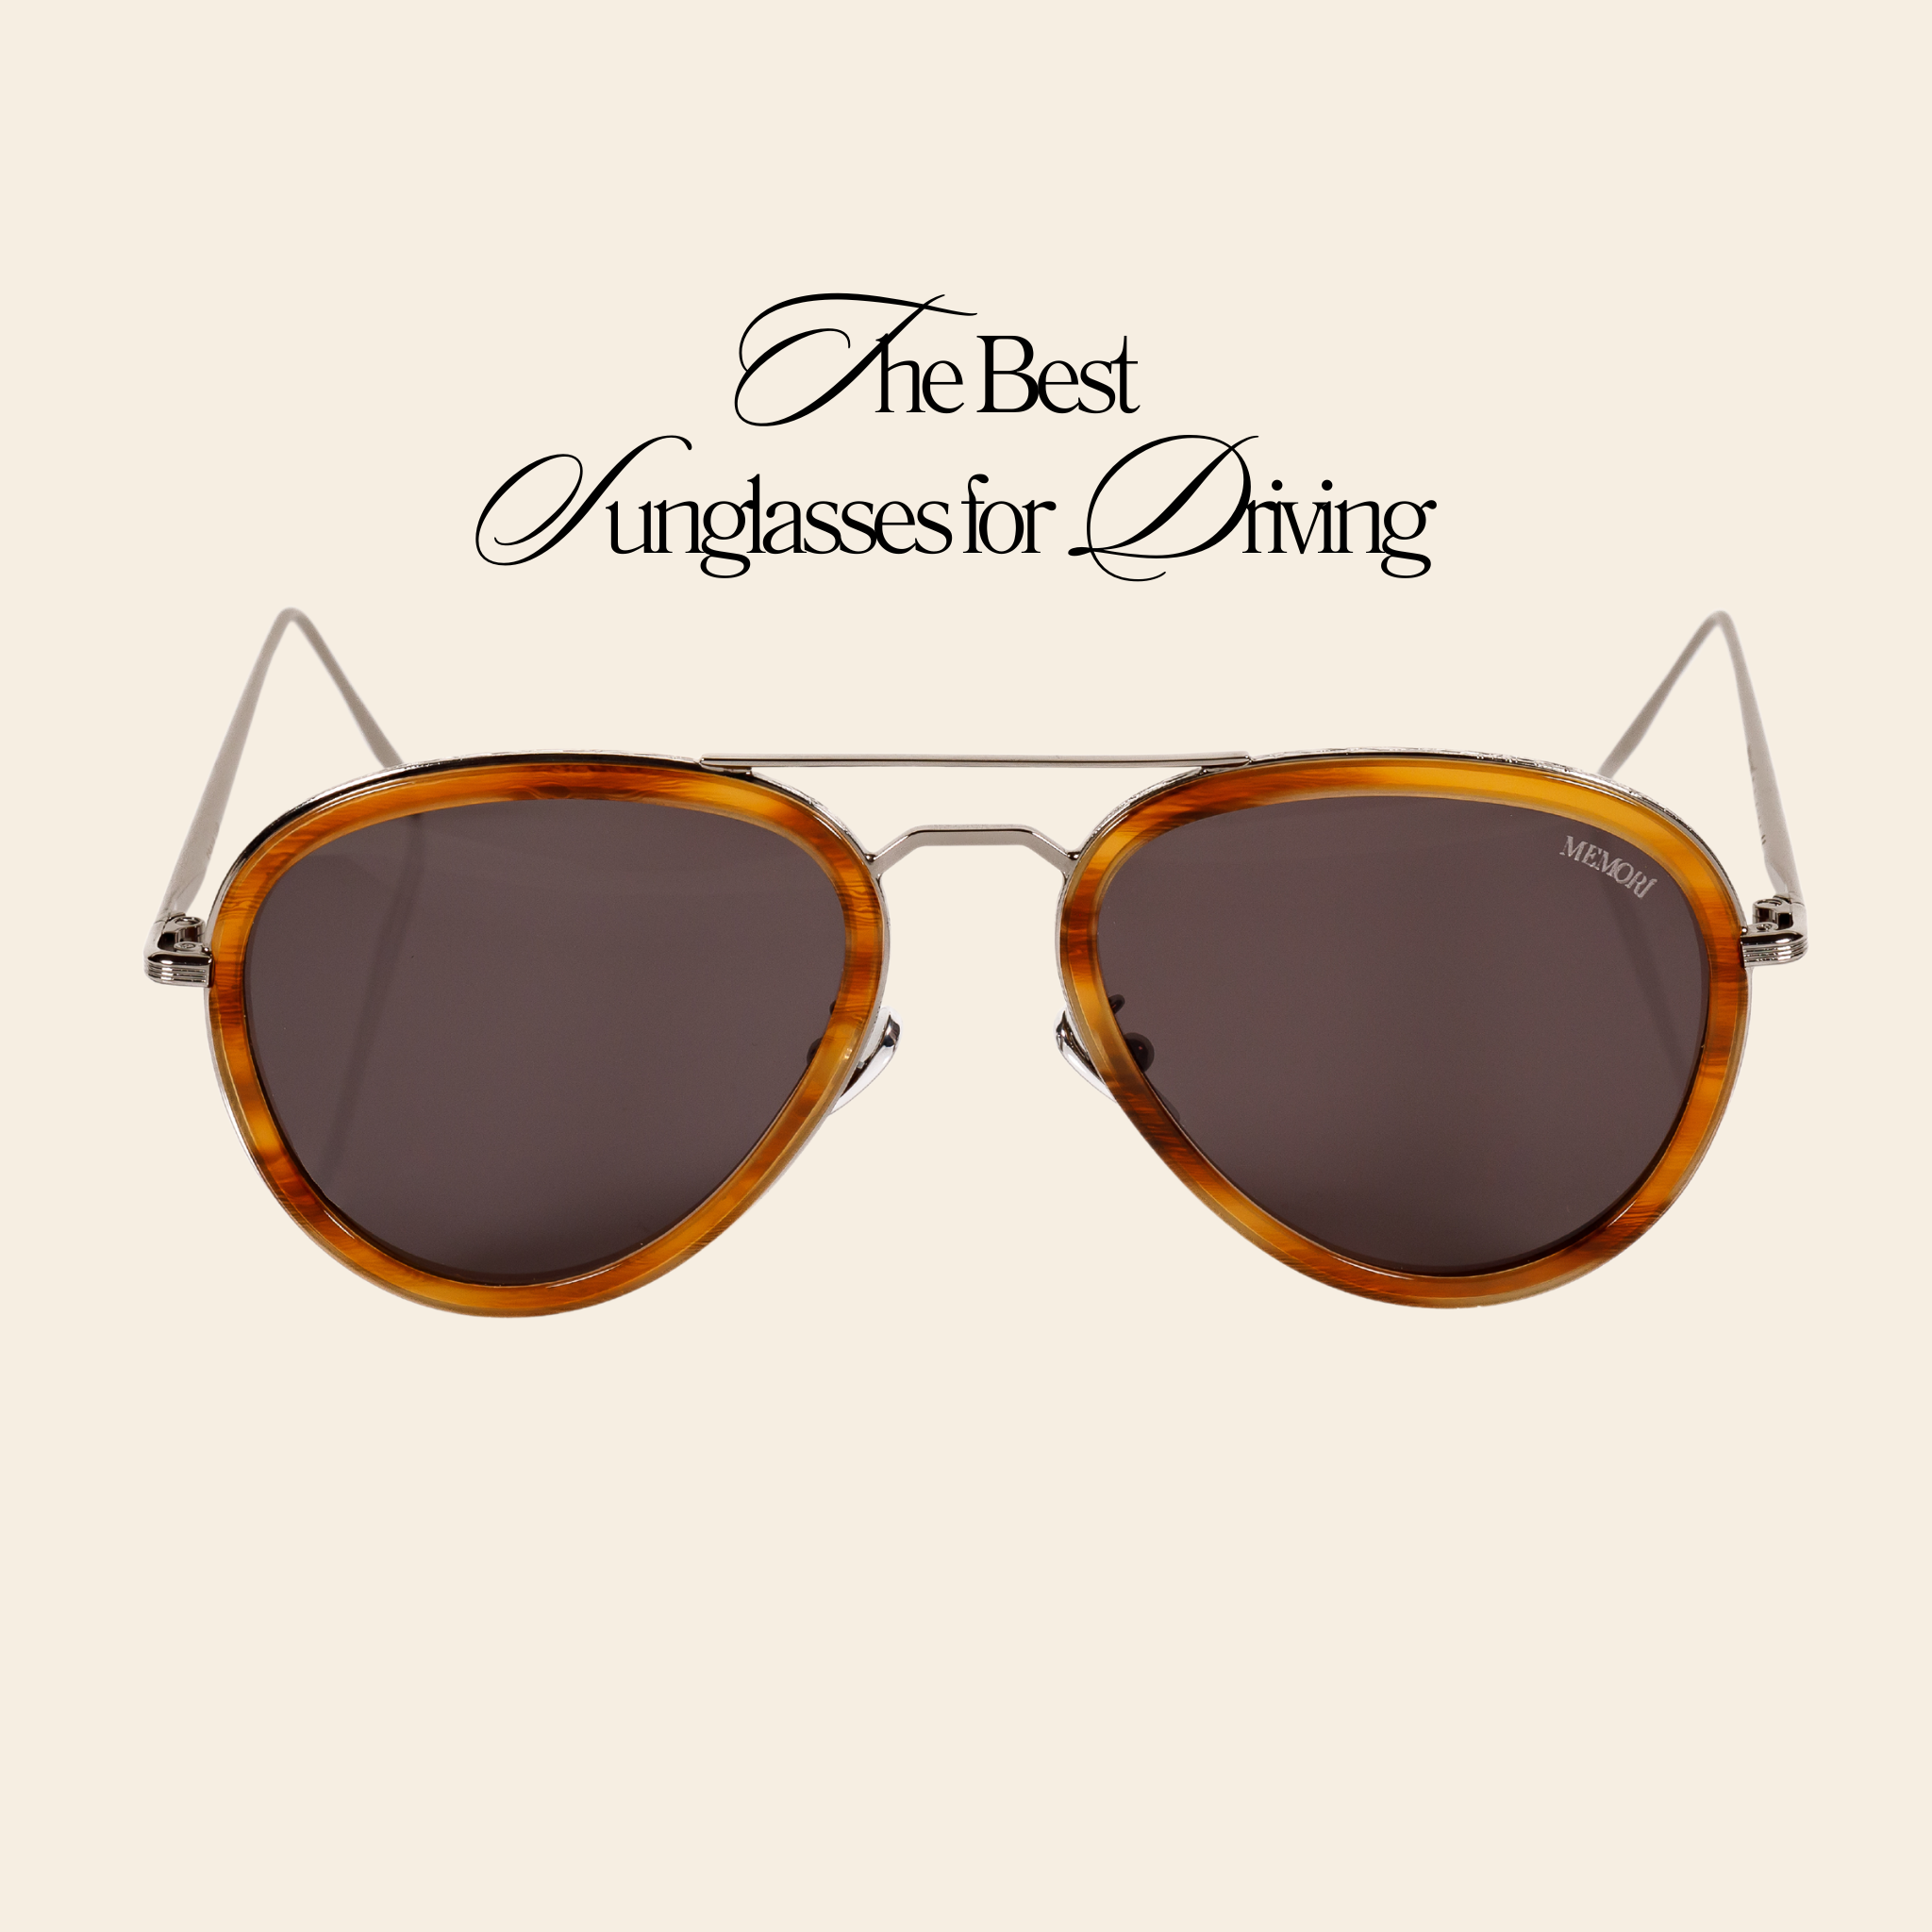 Photo displays a pair of Memorí small fit aviator sunglasses with tortoise shell lens sheath inlay. Aviator sunglasses are one of the best sunglasses for driving. 